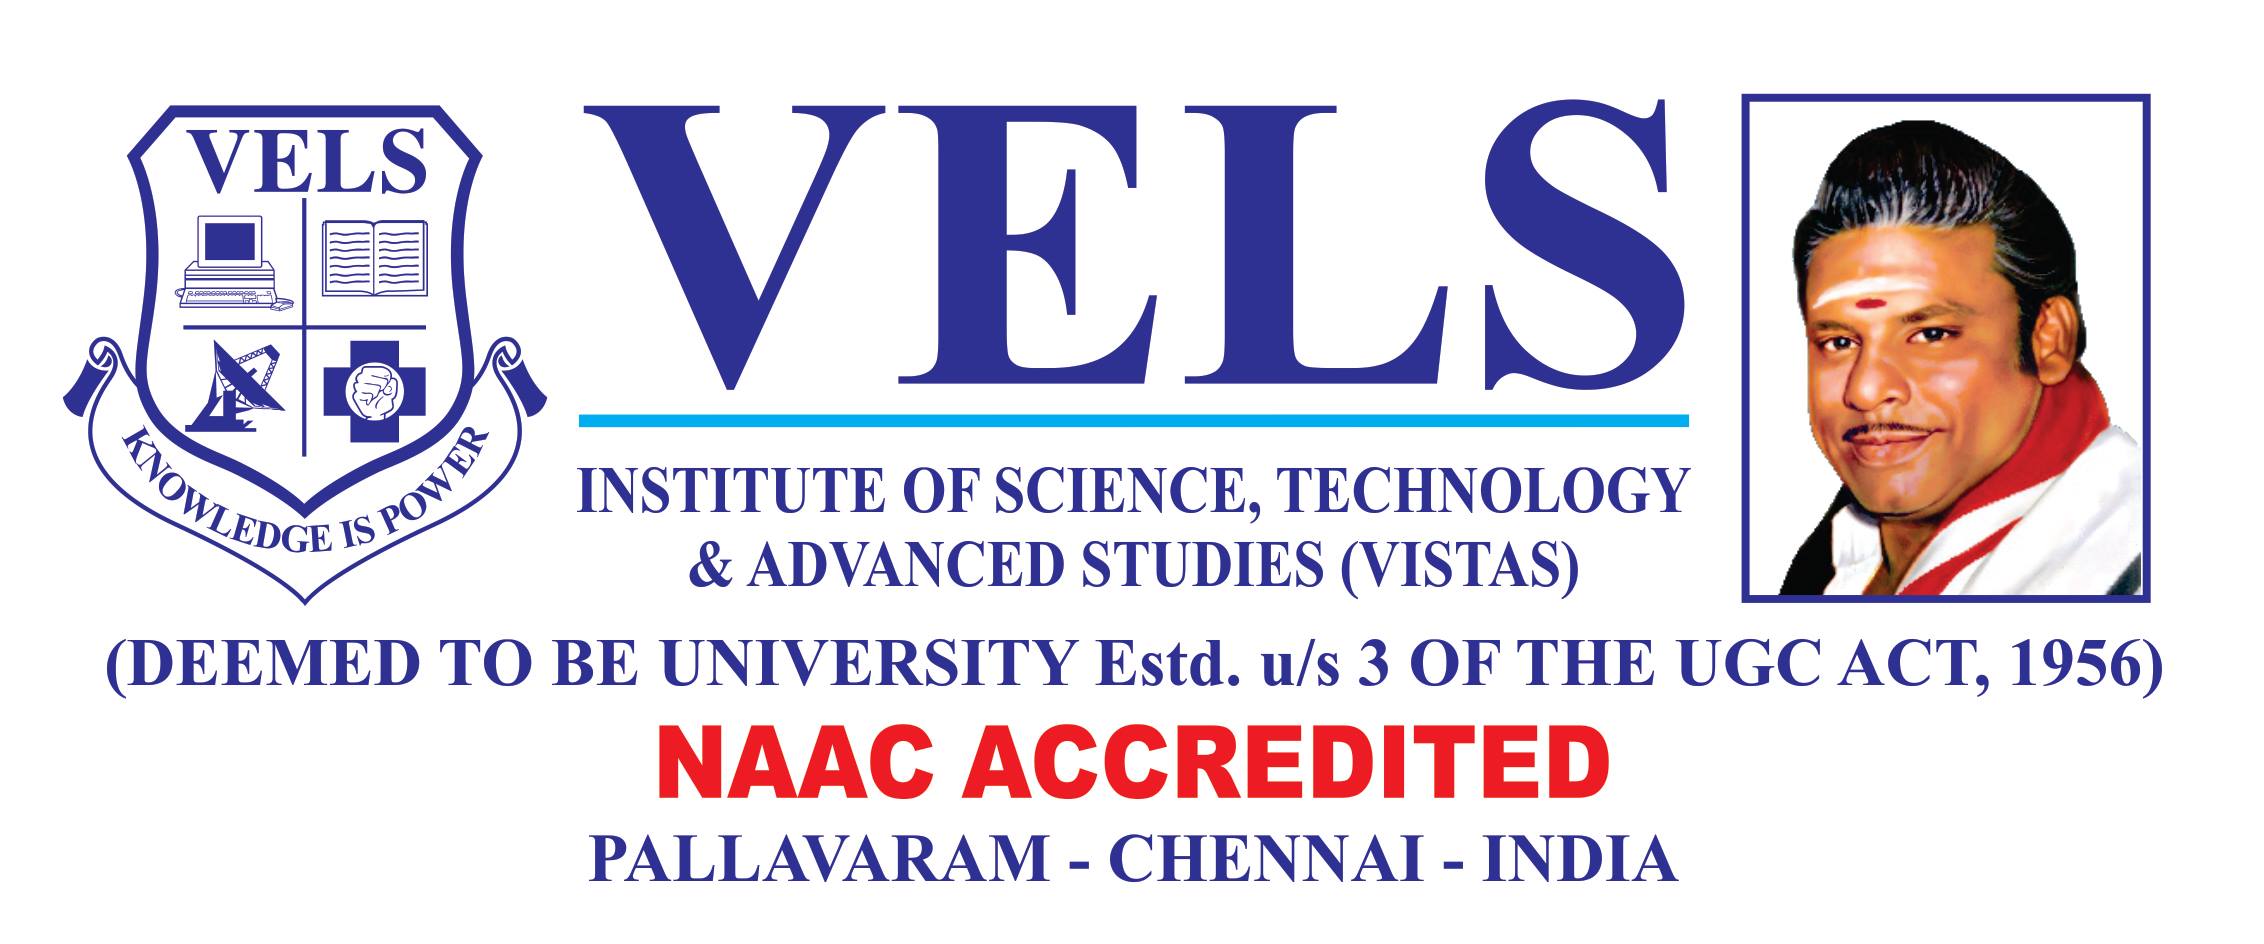 VELS INSTITUTE OF SCIENCE TECHNOLOGY & ADVANCED STUDIES